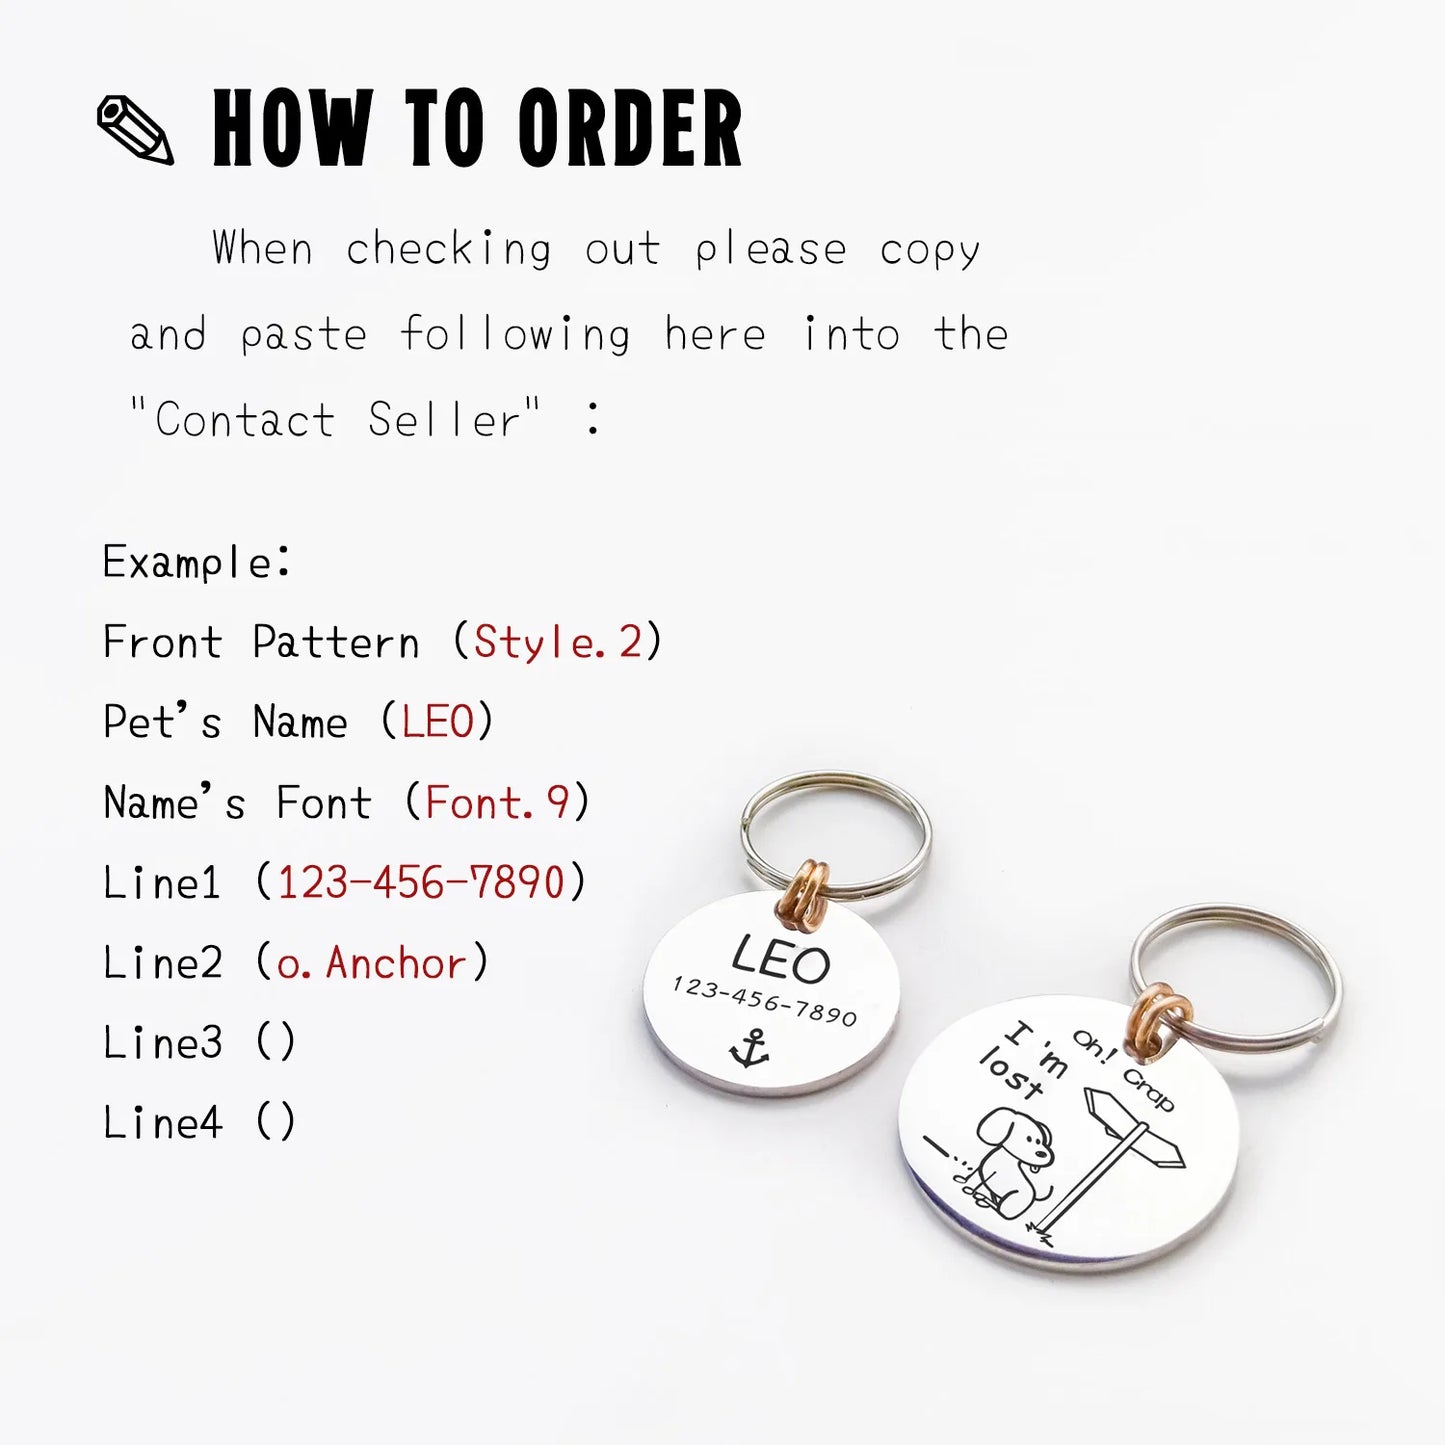 Personalized Engraved Pet Tags image showing how to order